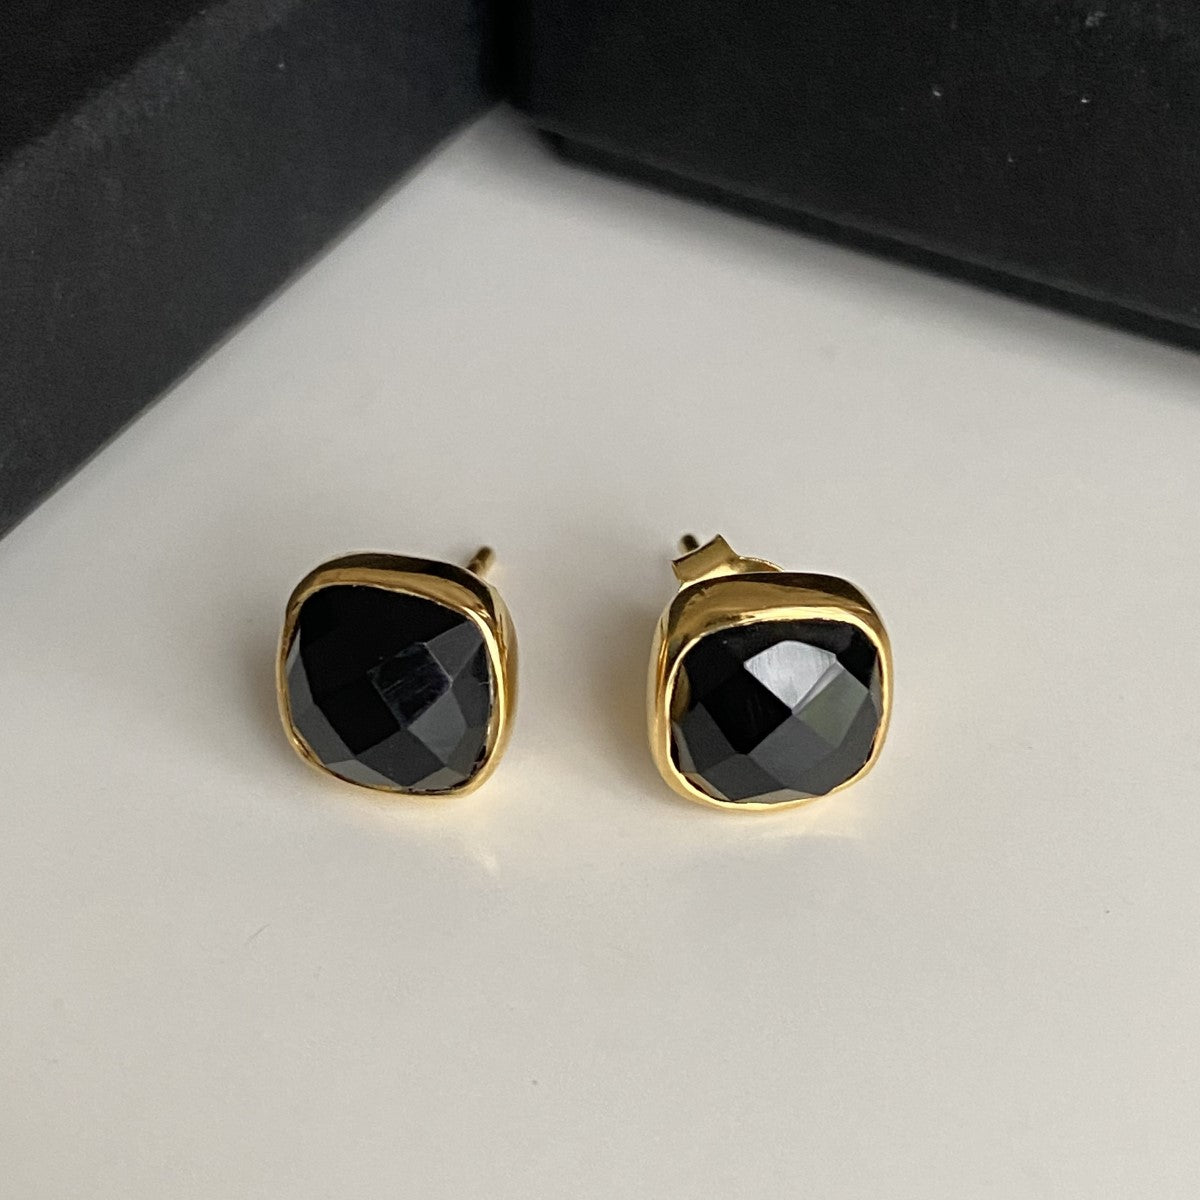 Faceted Square Black Onyx Gemstone Stud Earrings in Gold Plated Sterling Silver